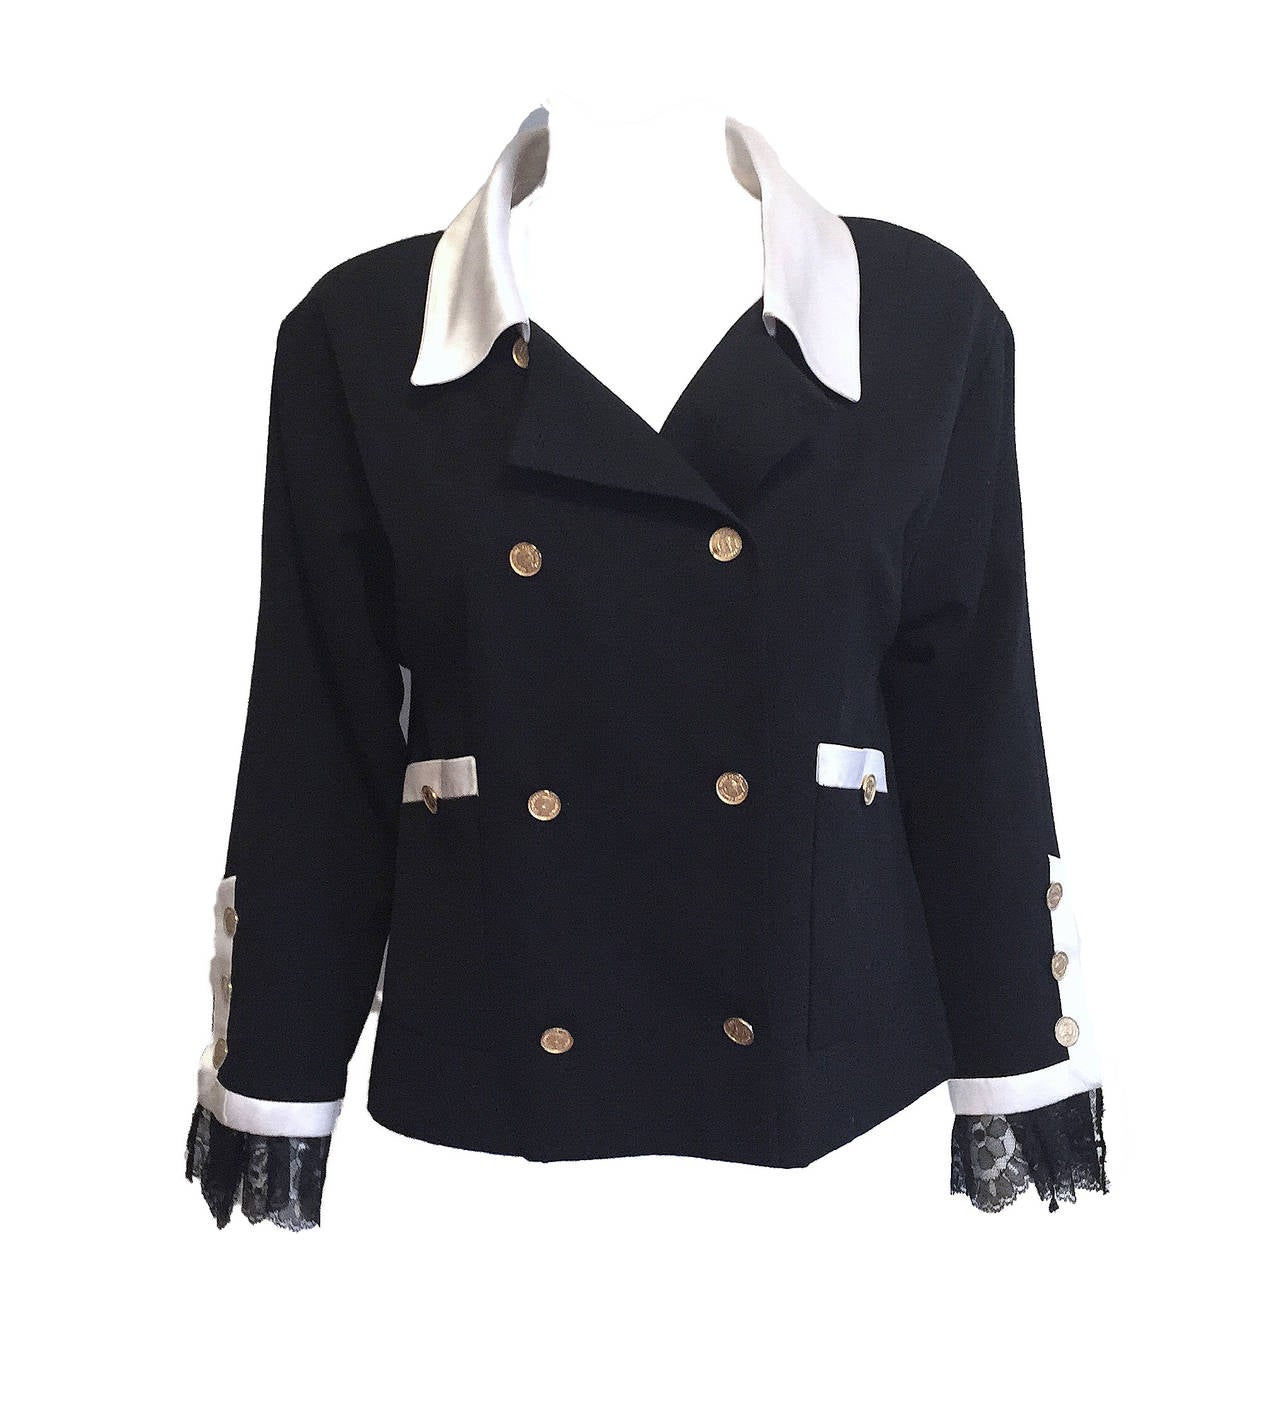 This Chanel jacket was reportedly modeled by Inès de la Fressange in the early 1980s, just a few years after the House launched its Ready to Wear line in 1978. Black wool with ivory silk collar and accents, gold-tone buttons, and lace-trimmed